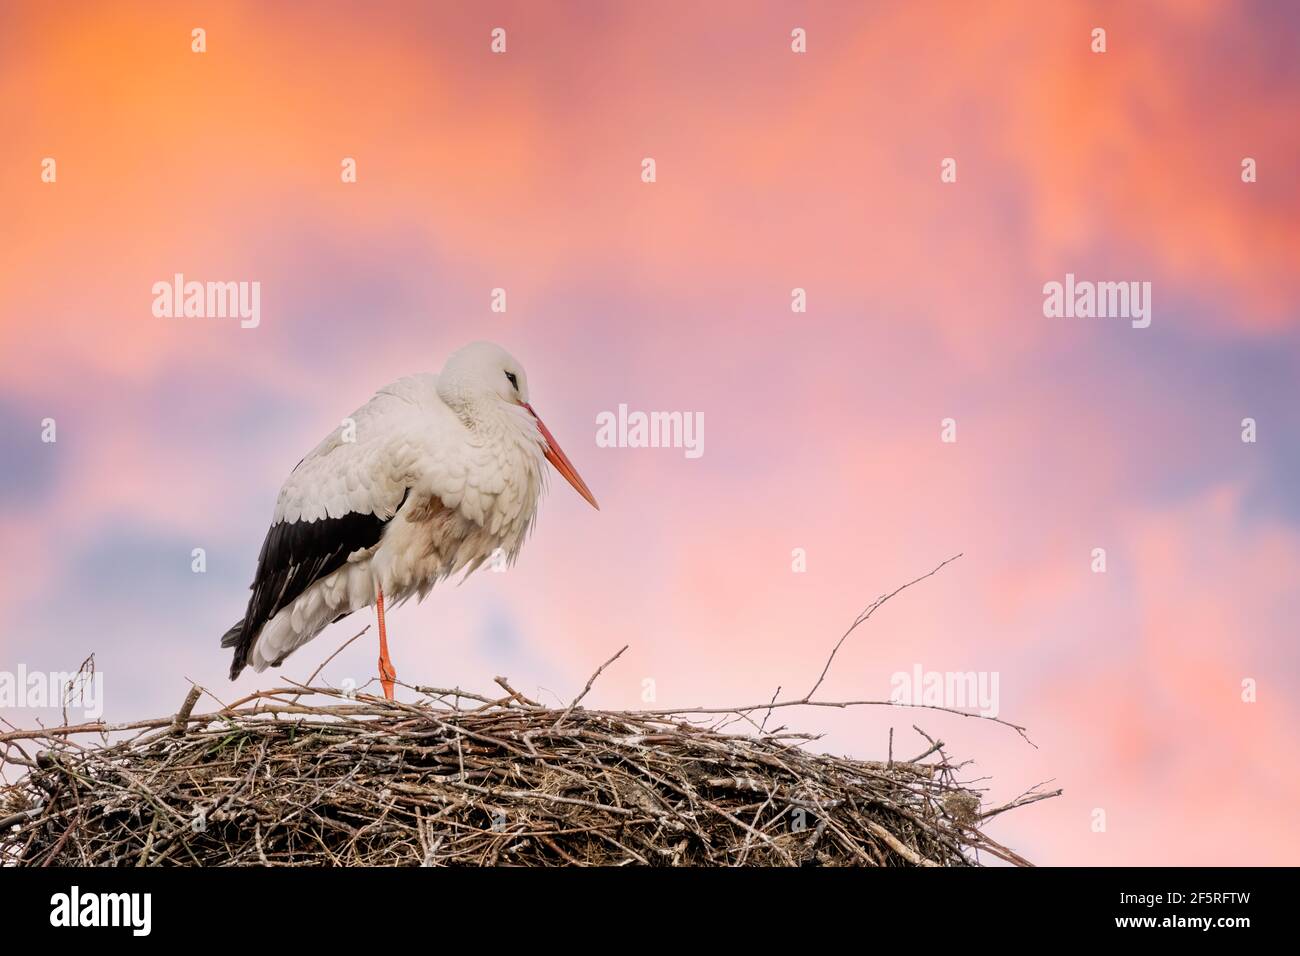 A stork stands in its nest on one leg, dramatic red and blue sky in background. copy-space Stock Photo